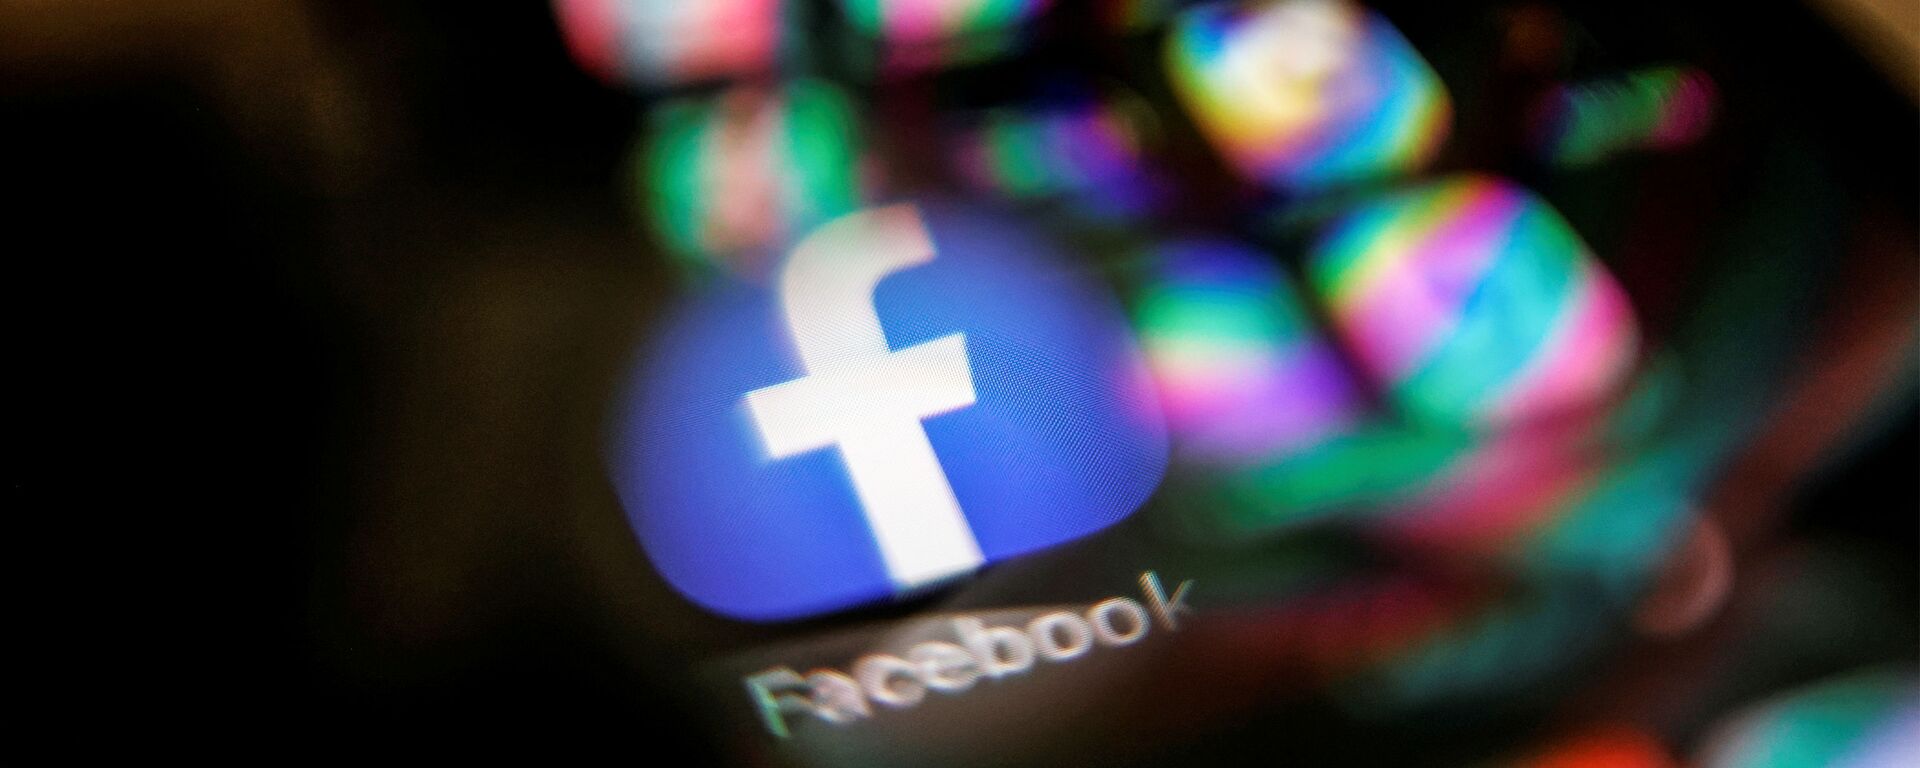 The Facebook logo displayed on a mobile phone is seen through a magnifying glass in this picture illustration taken February 9, 2021 - Sputnik International, 1920, 31.03.2021